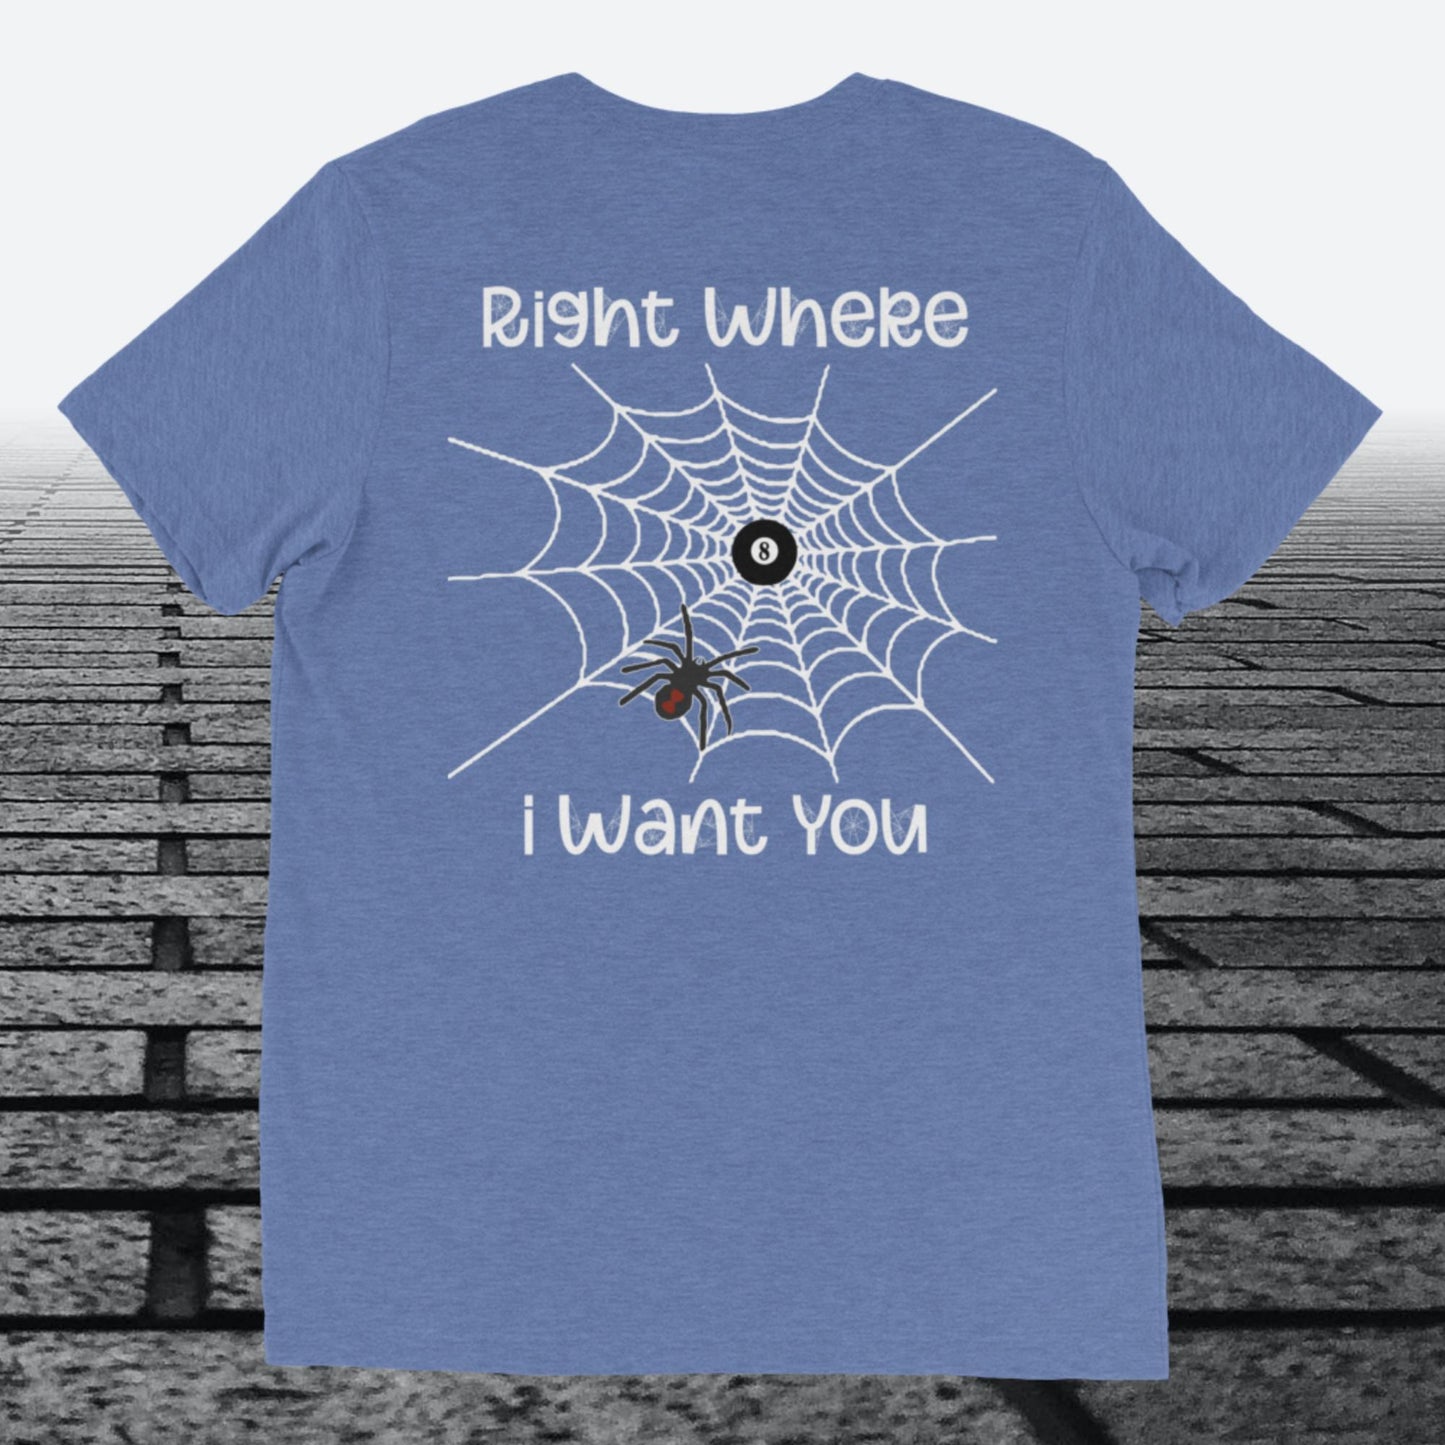 Right Where I Want You with white web, logo on the front, Tri-blend t-shirt